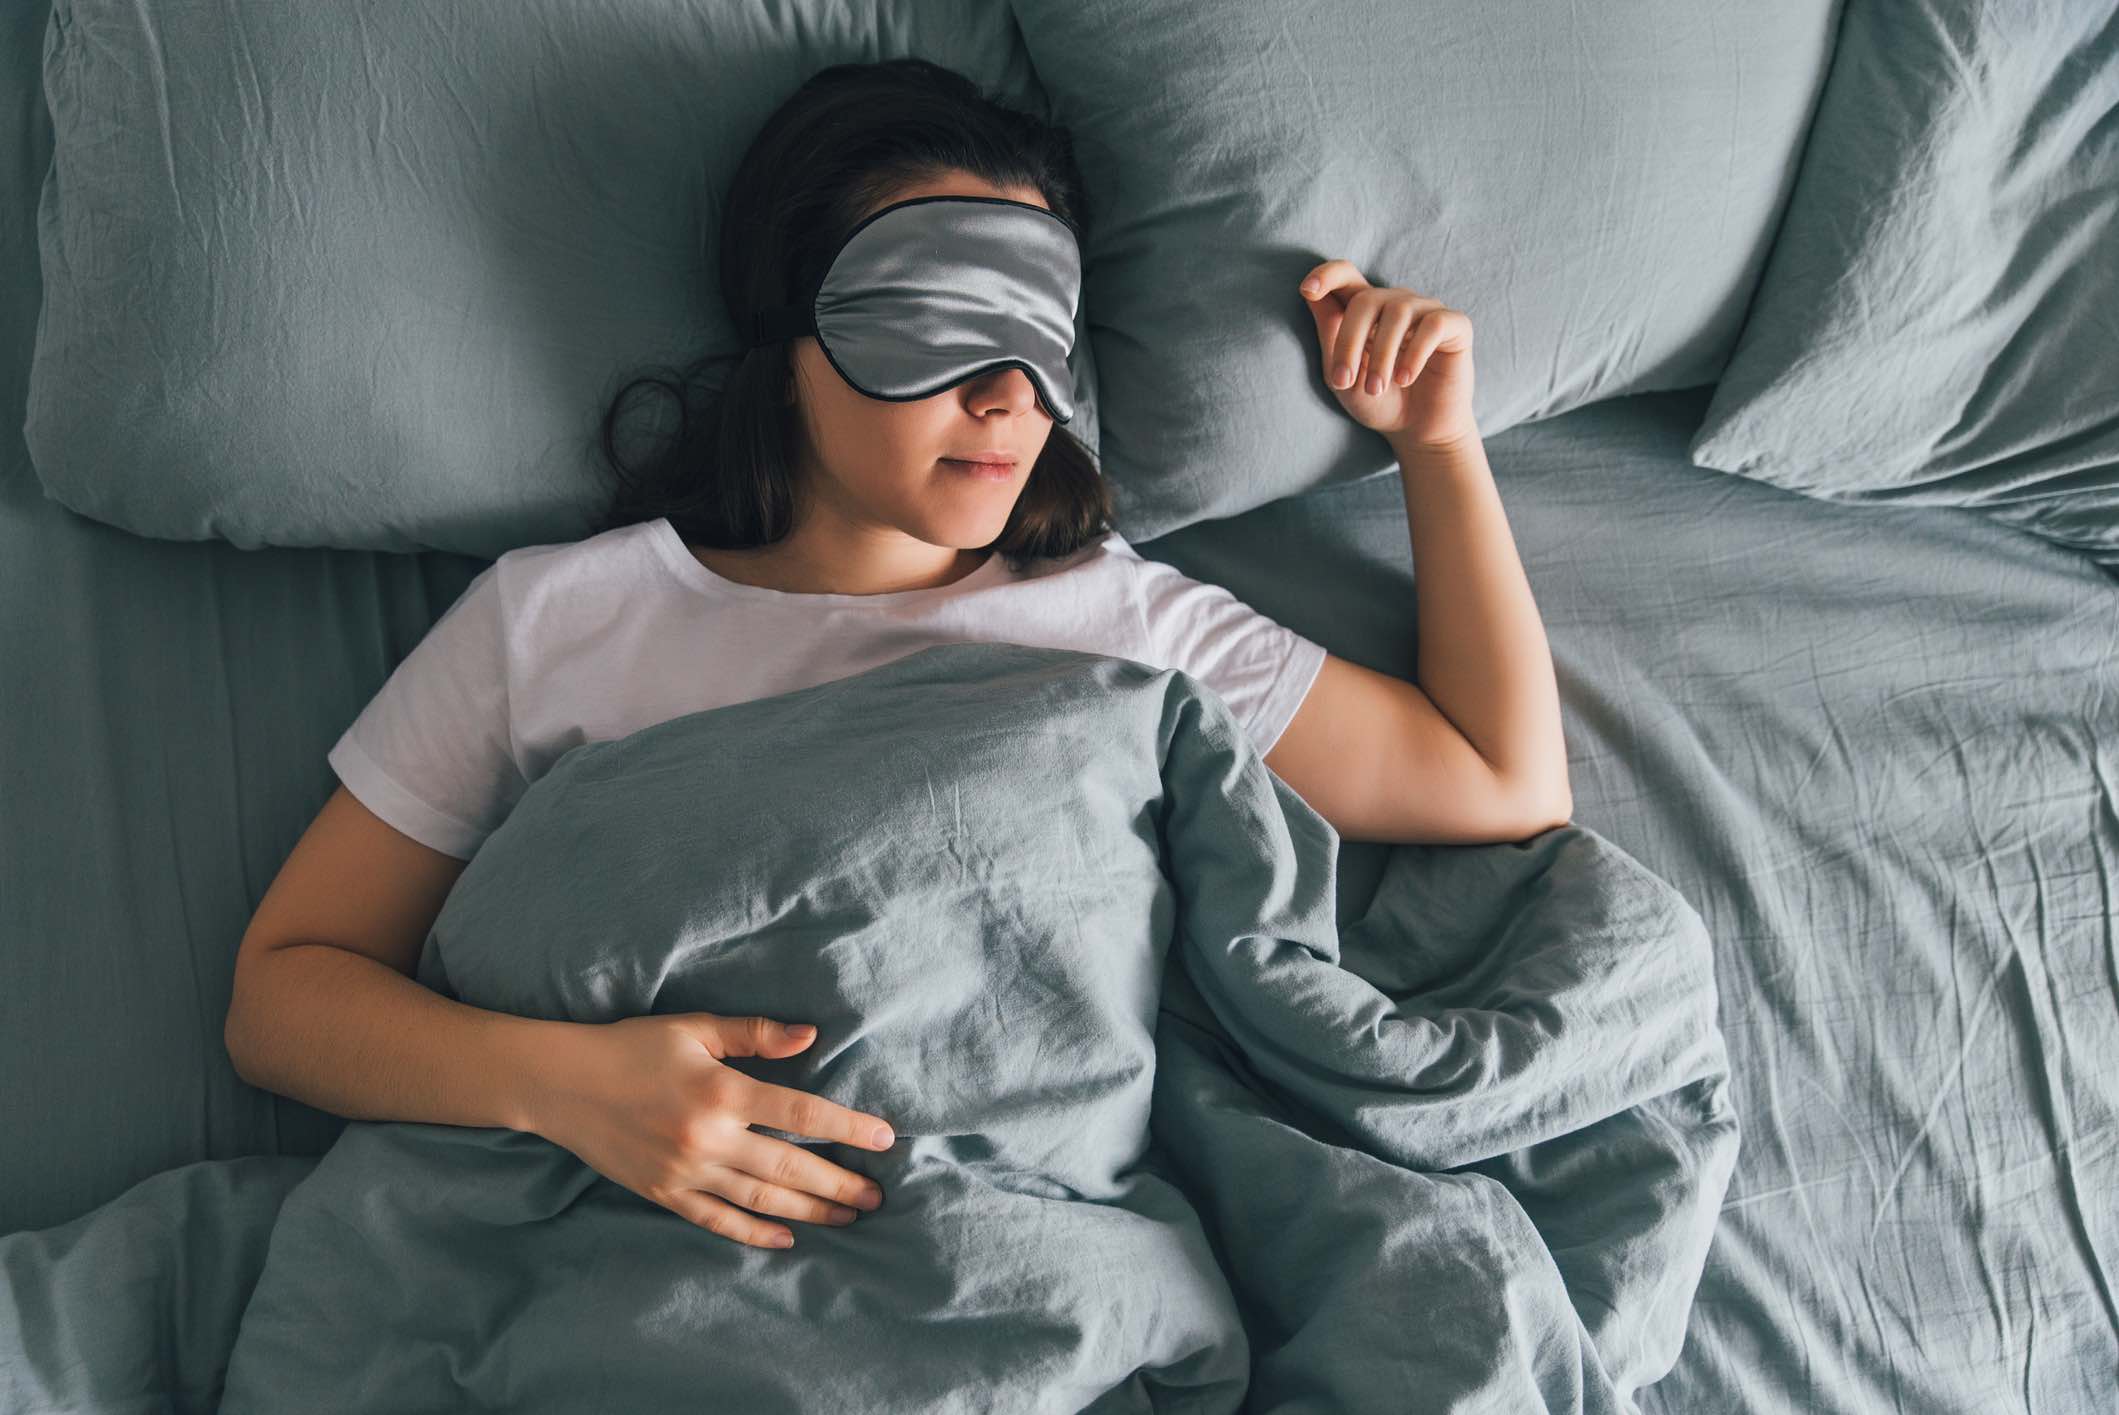 How Sleep Cycle Can Depict Personality Traits, Explains This Study